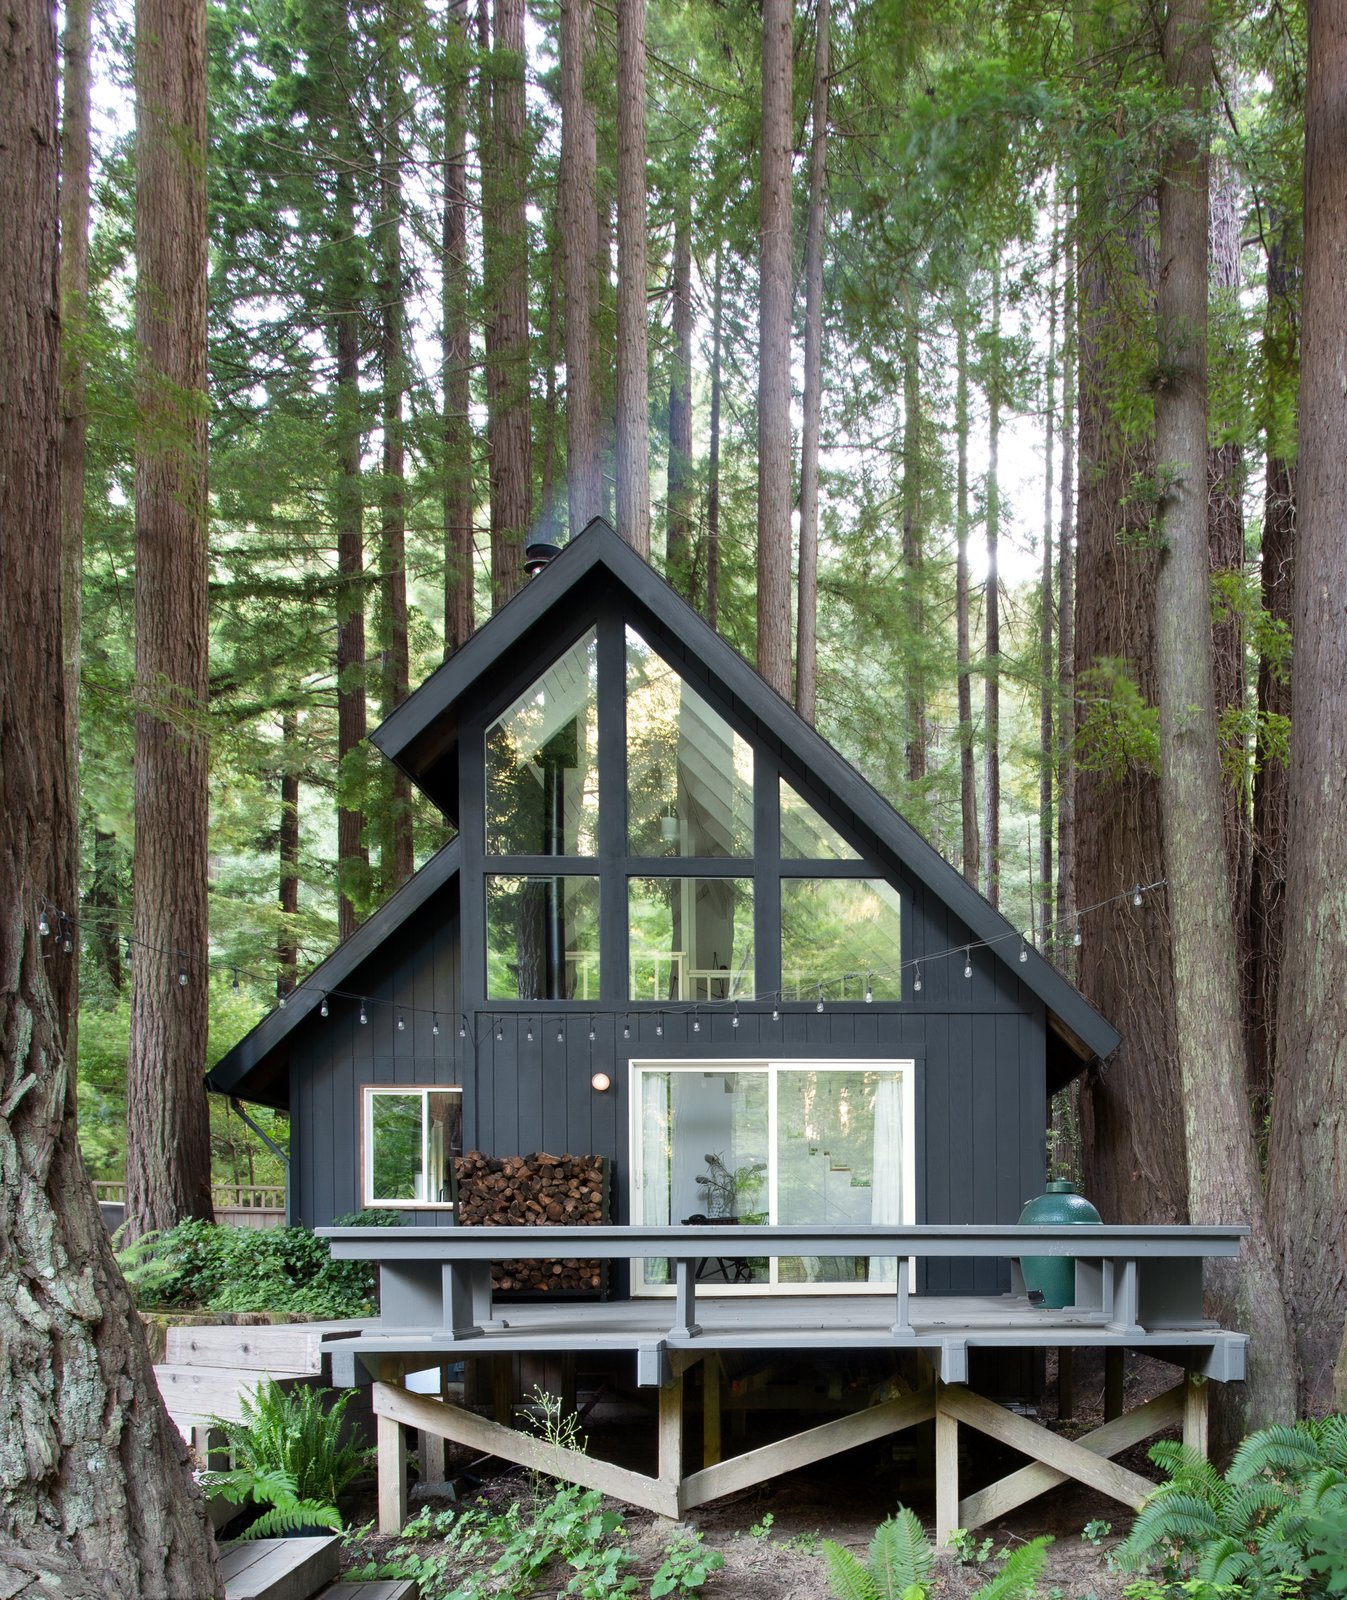 This Pristine A-Frame Cabin Glows Like a Lantern in a Redwood Forest